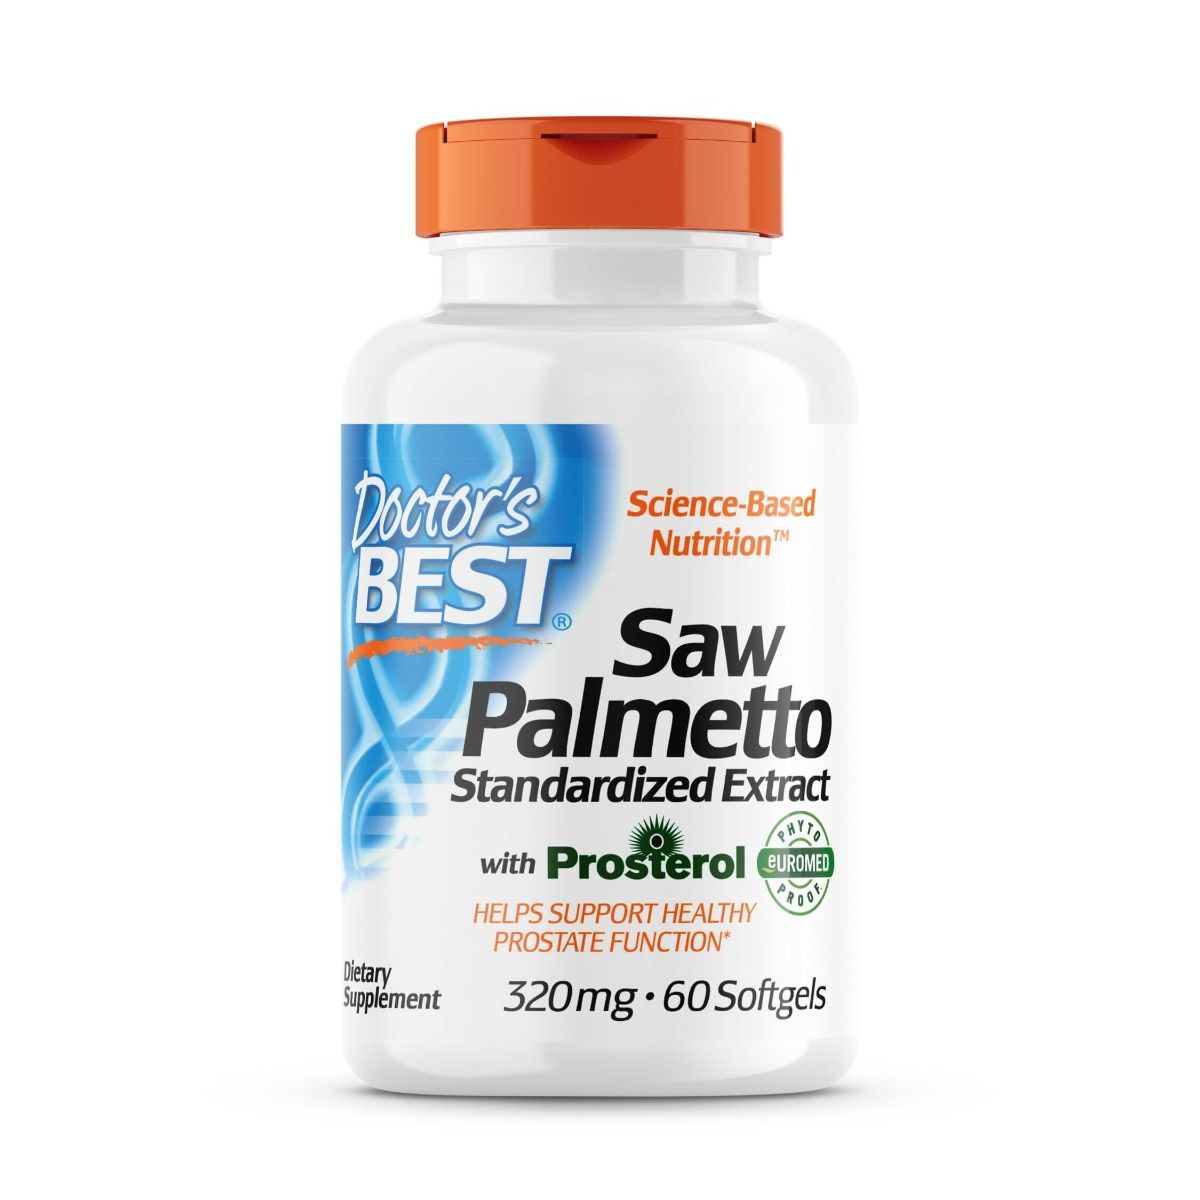 Photos - Vitamins & Minerals Doctors Best Doctor's Best Saw Palmetto with Prosterol, Standardized Extract 320 mg 60 